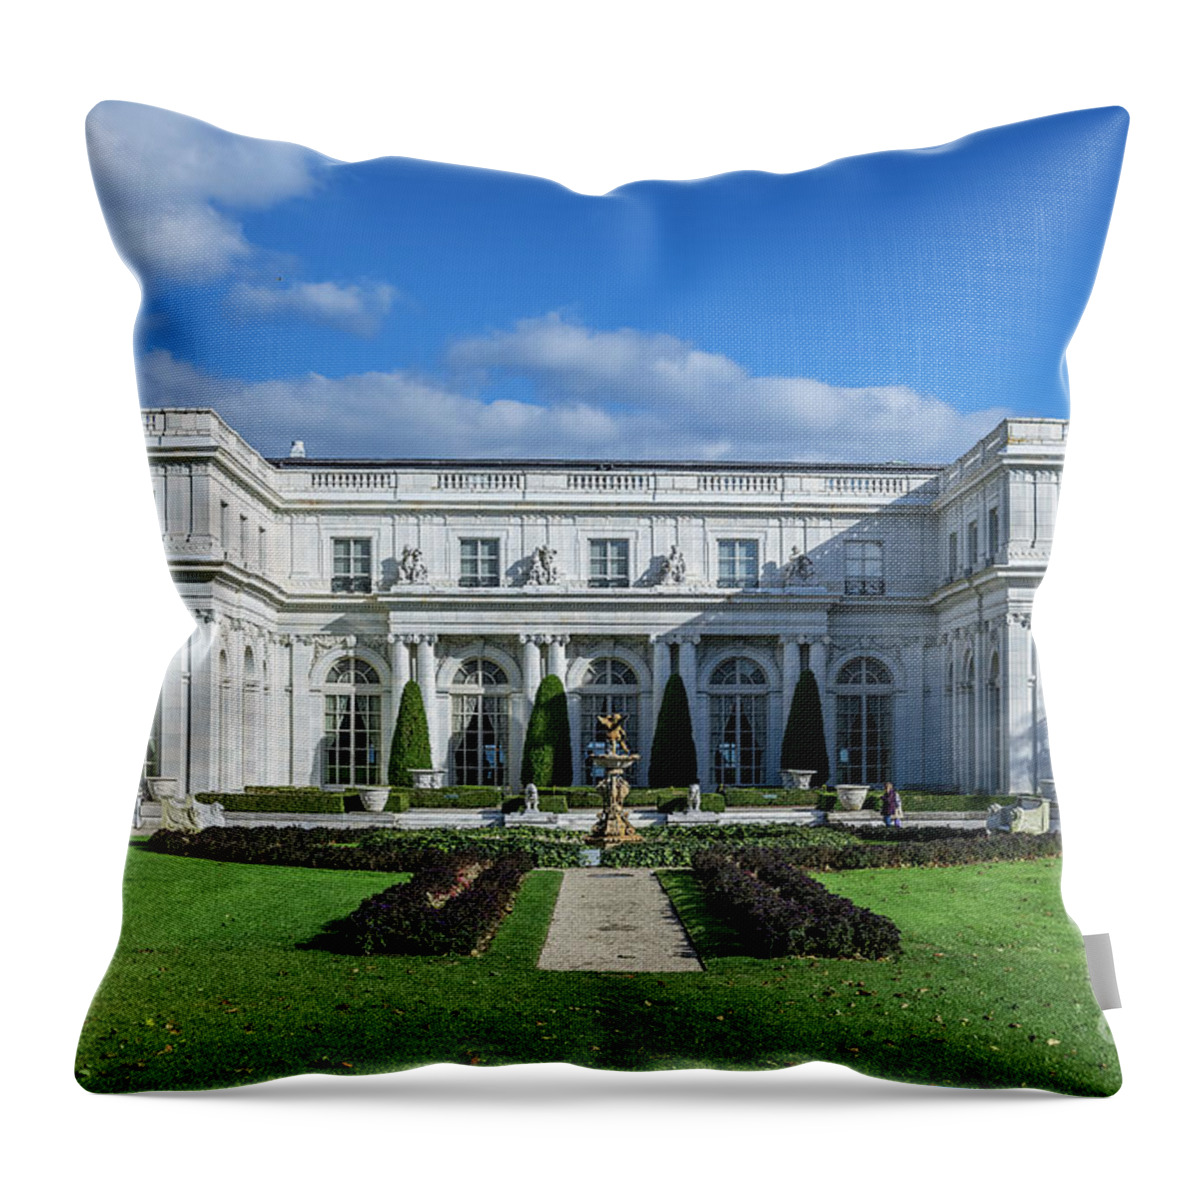 America Throw Pillow featuring the photograph Rosecliff Mansion by John Greim